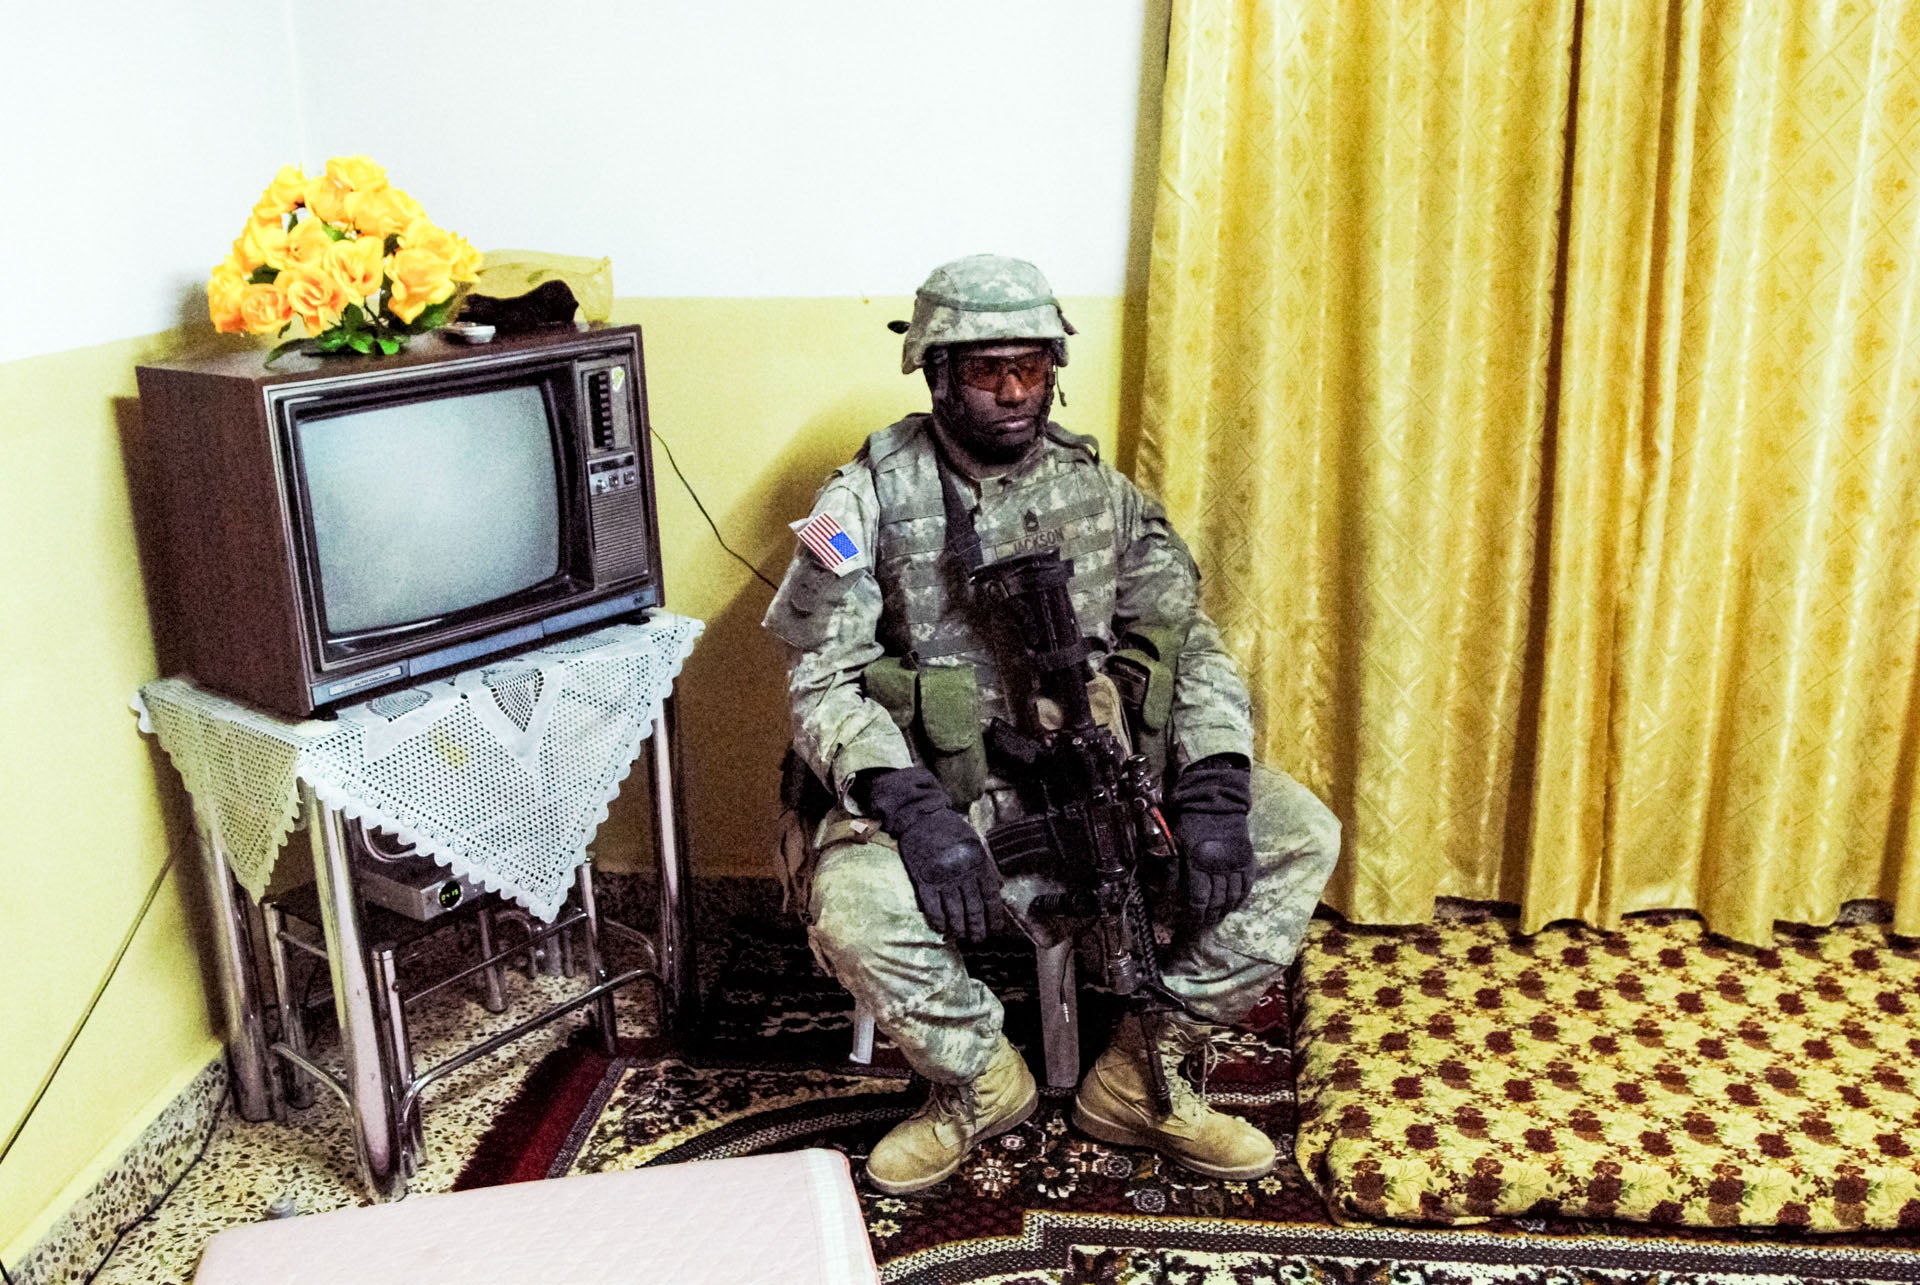 An American soldier rests during a night raid in Rawa, Iraq in 2006